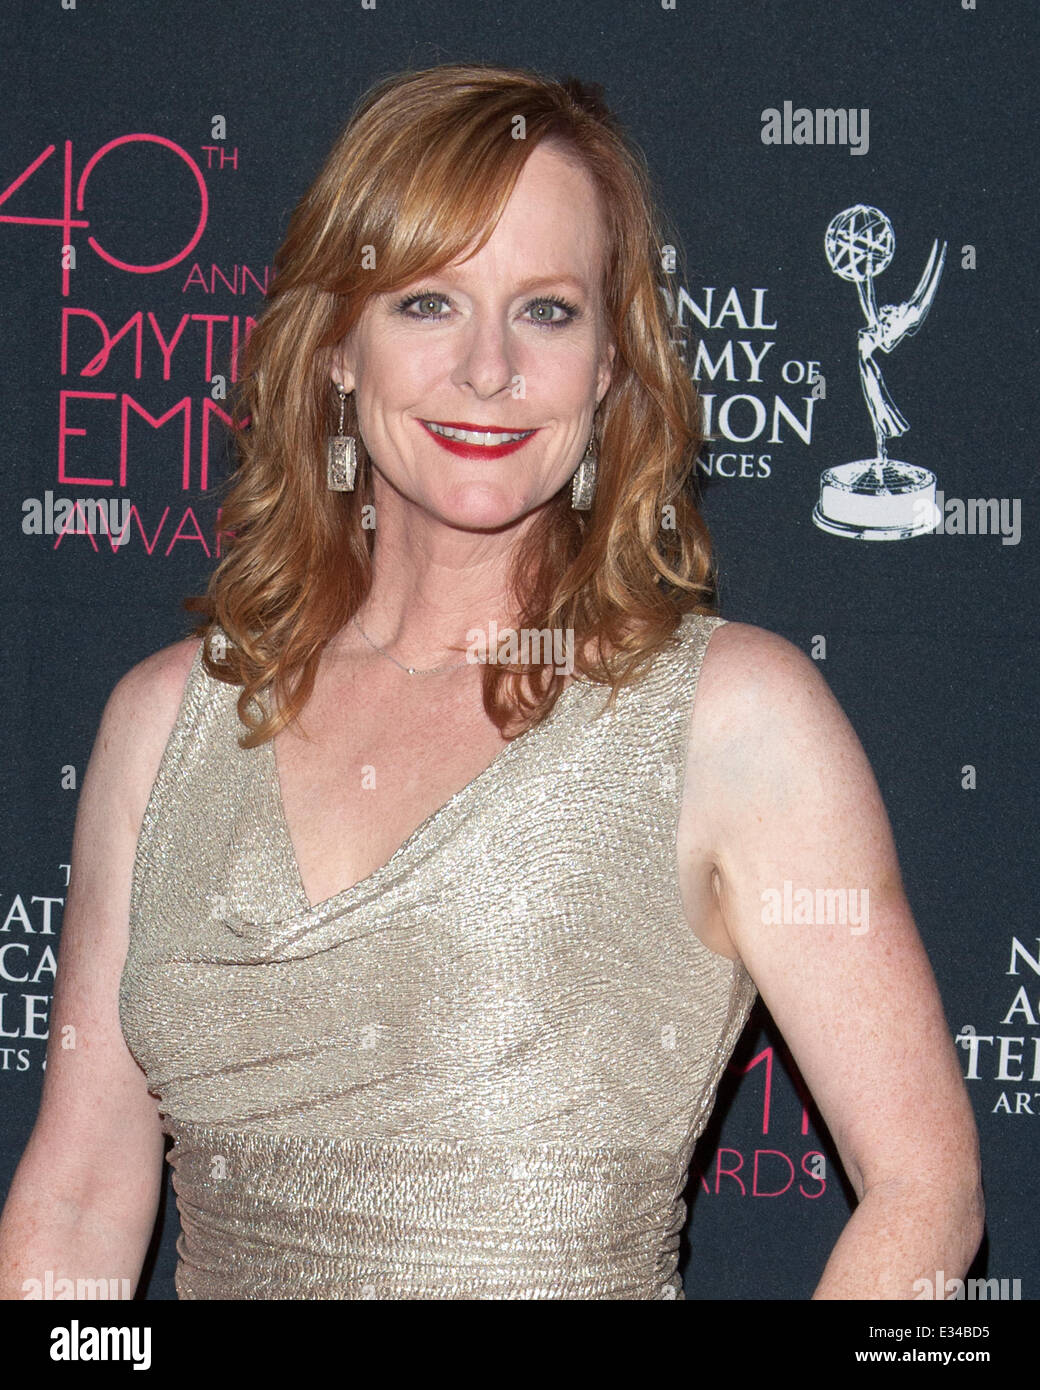 40th Annual Daytime Entertainment Creative Arts Emmy Awards at the Westin Bonaventure  Featuring: Mary McDonough Where: Los Angeles, California, United States When: 14 Jun 2013niel Tanner/WENN.com Stock Photo